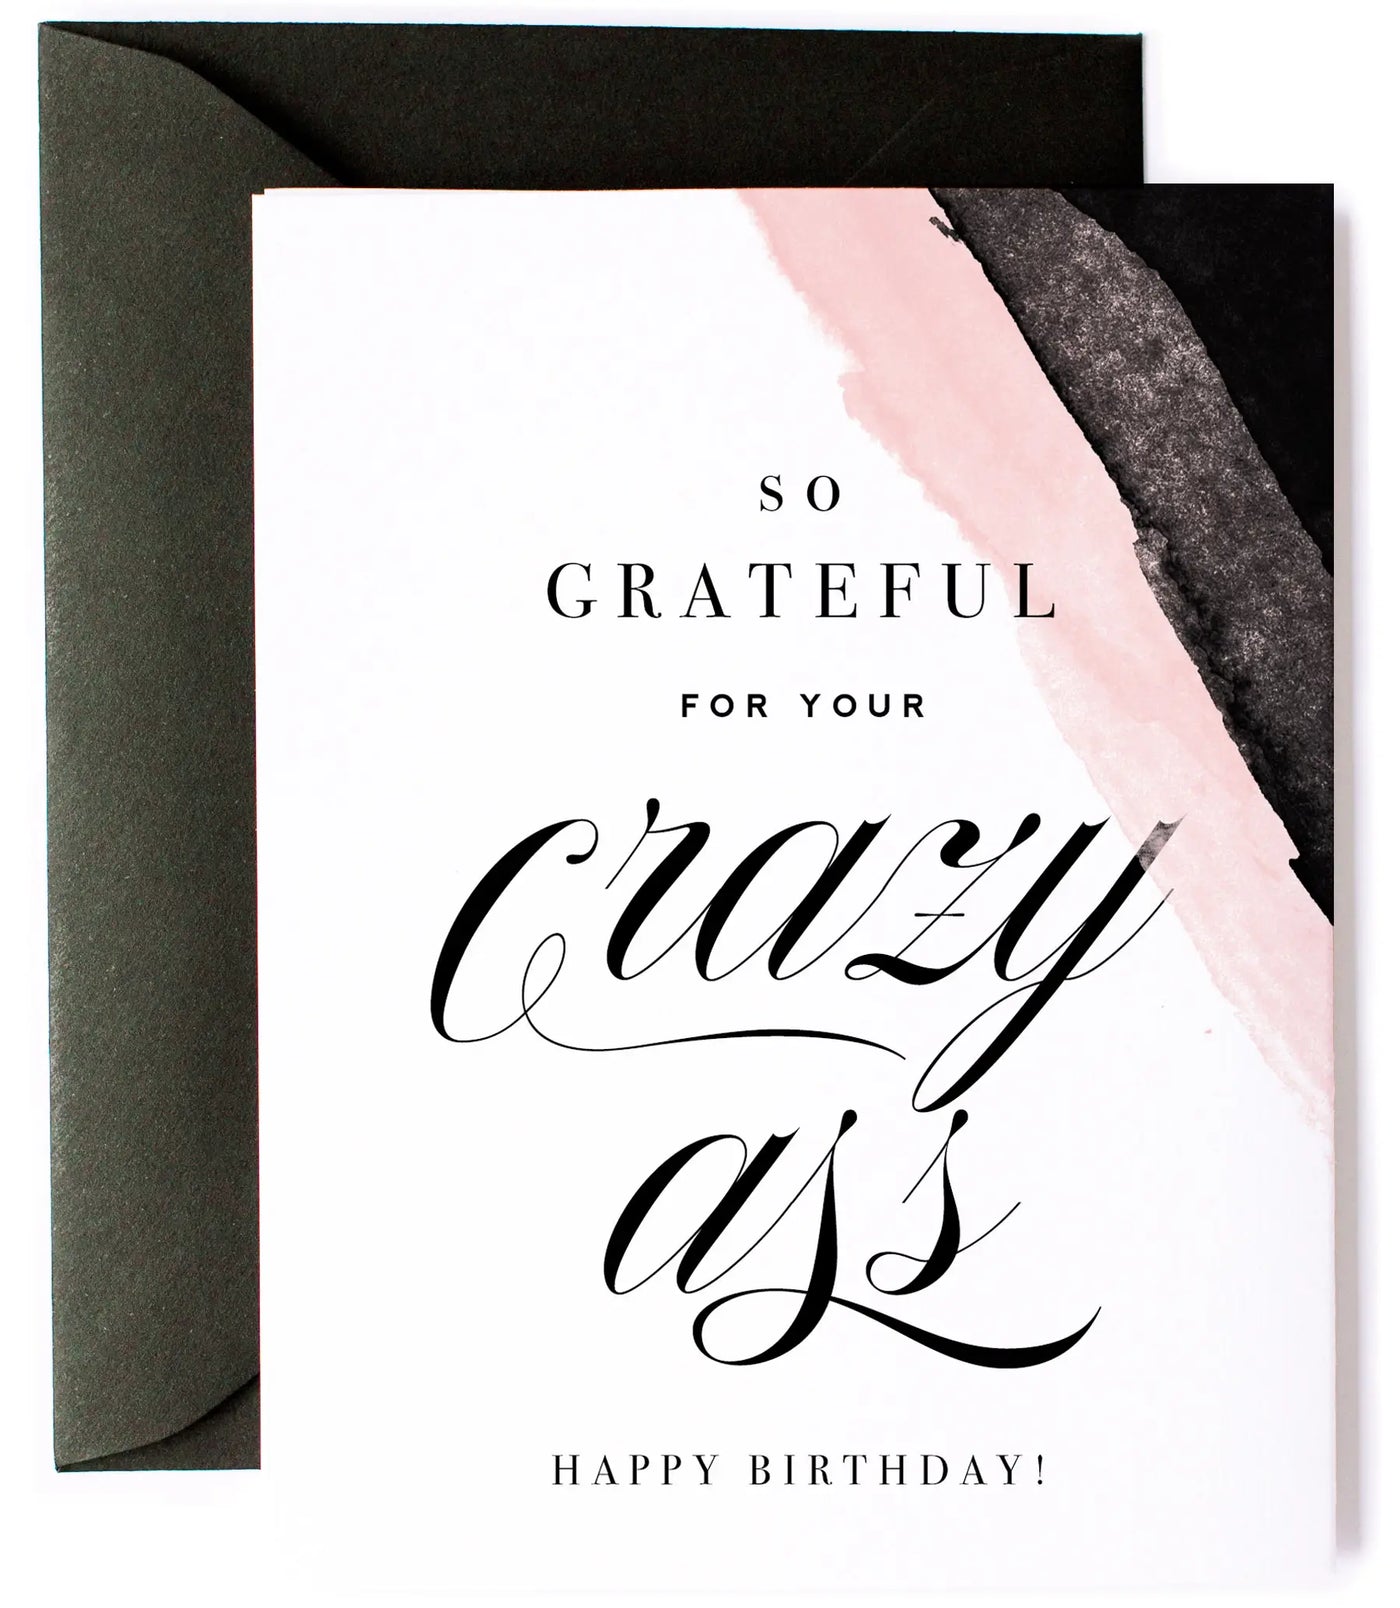 Grateful For Your Crazy Ass - Birthday Card